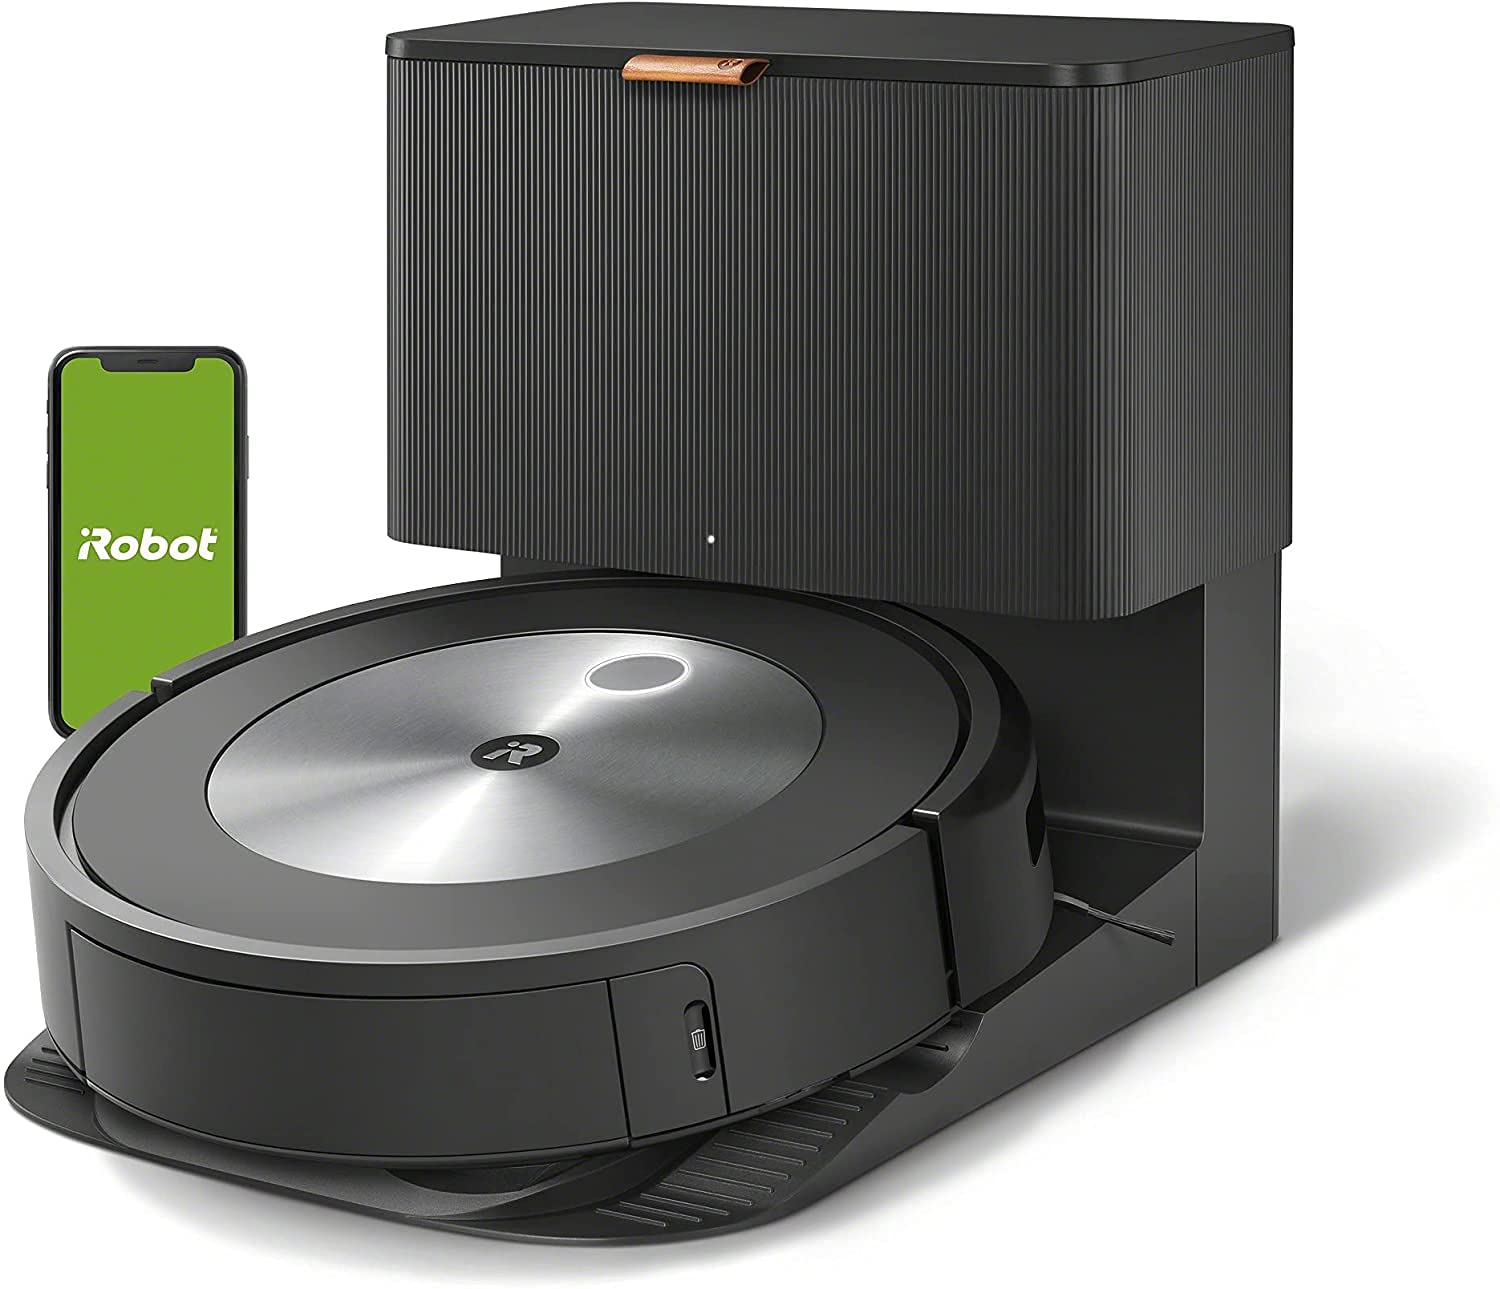 iRobot Roomba j7+ (7550) Self-Emptying Robot Vacuum – Avoids Common Obstacles Like Socks, Shoes, and Pet Waste, Empties Itself for 60 Days, Smart Mapping, Works with Alexa $529.99